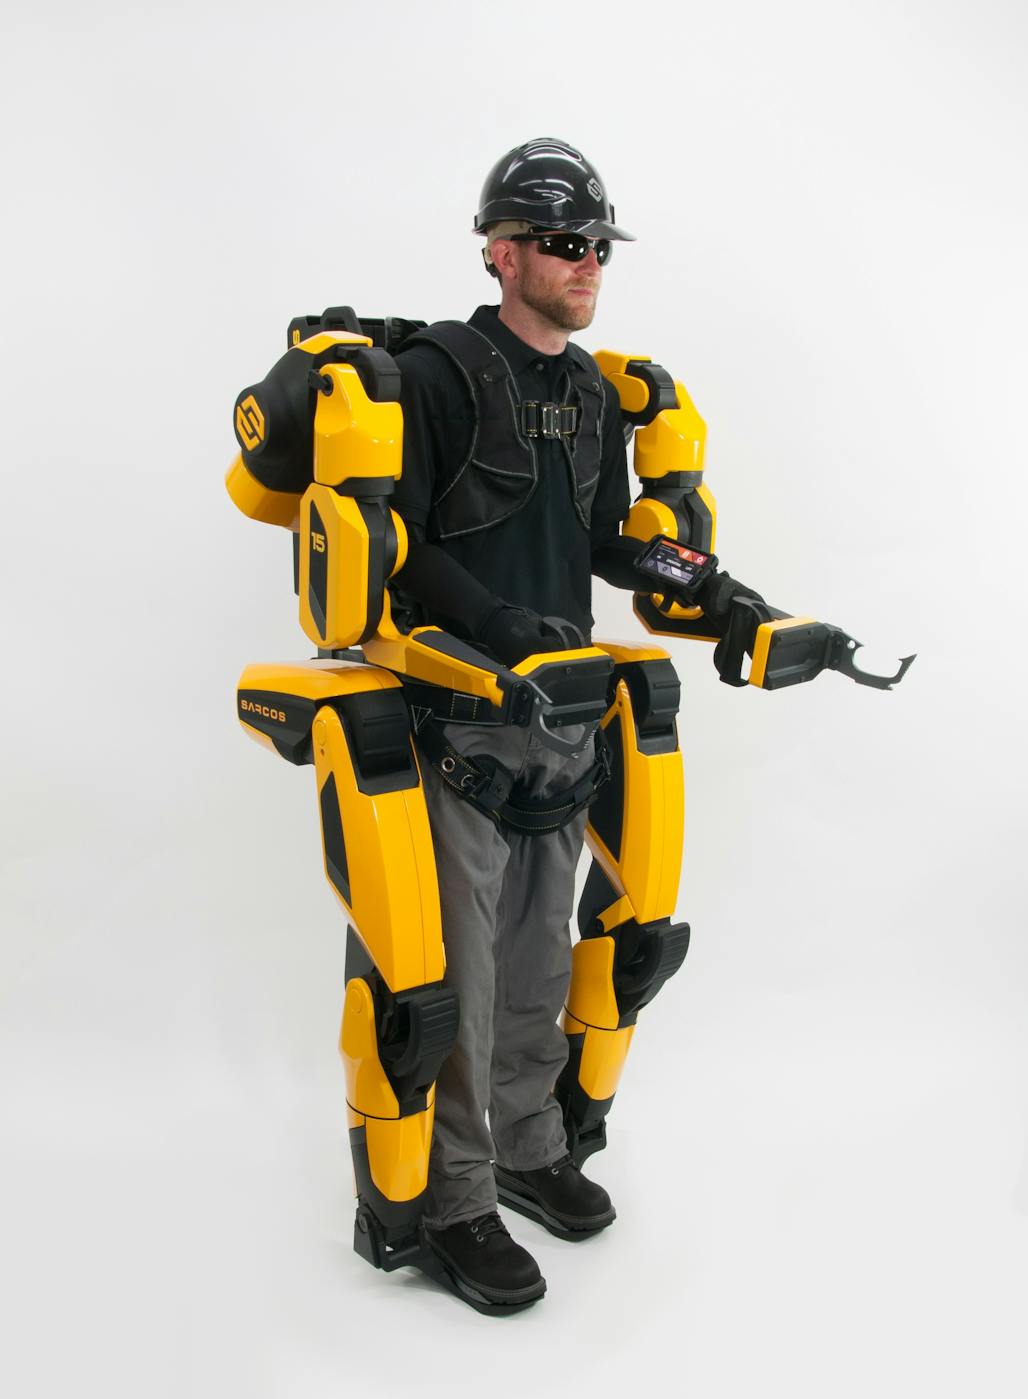 Bionic construction worker robotic exoskeleton  coming in 